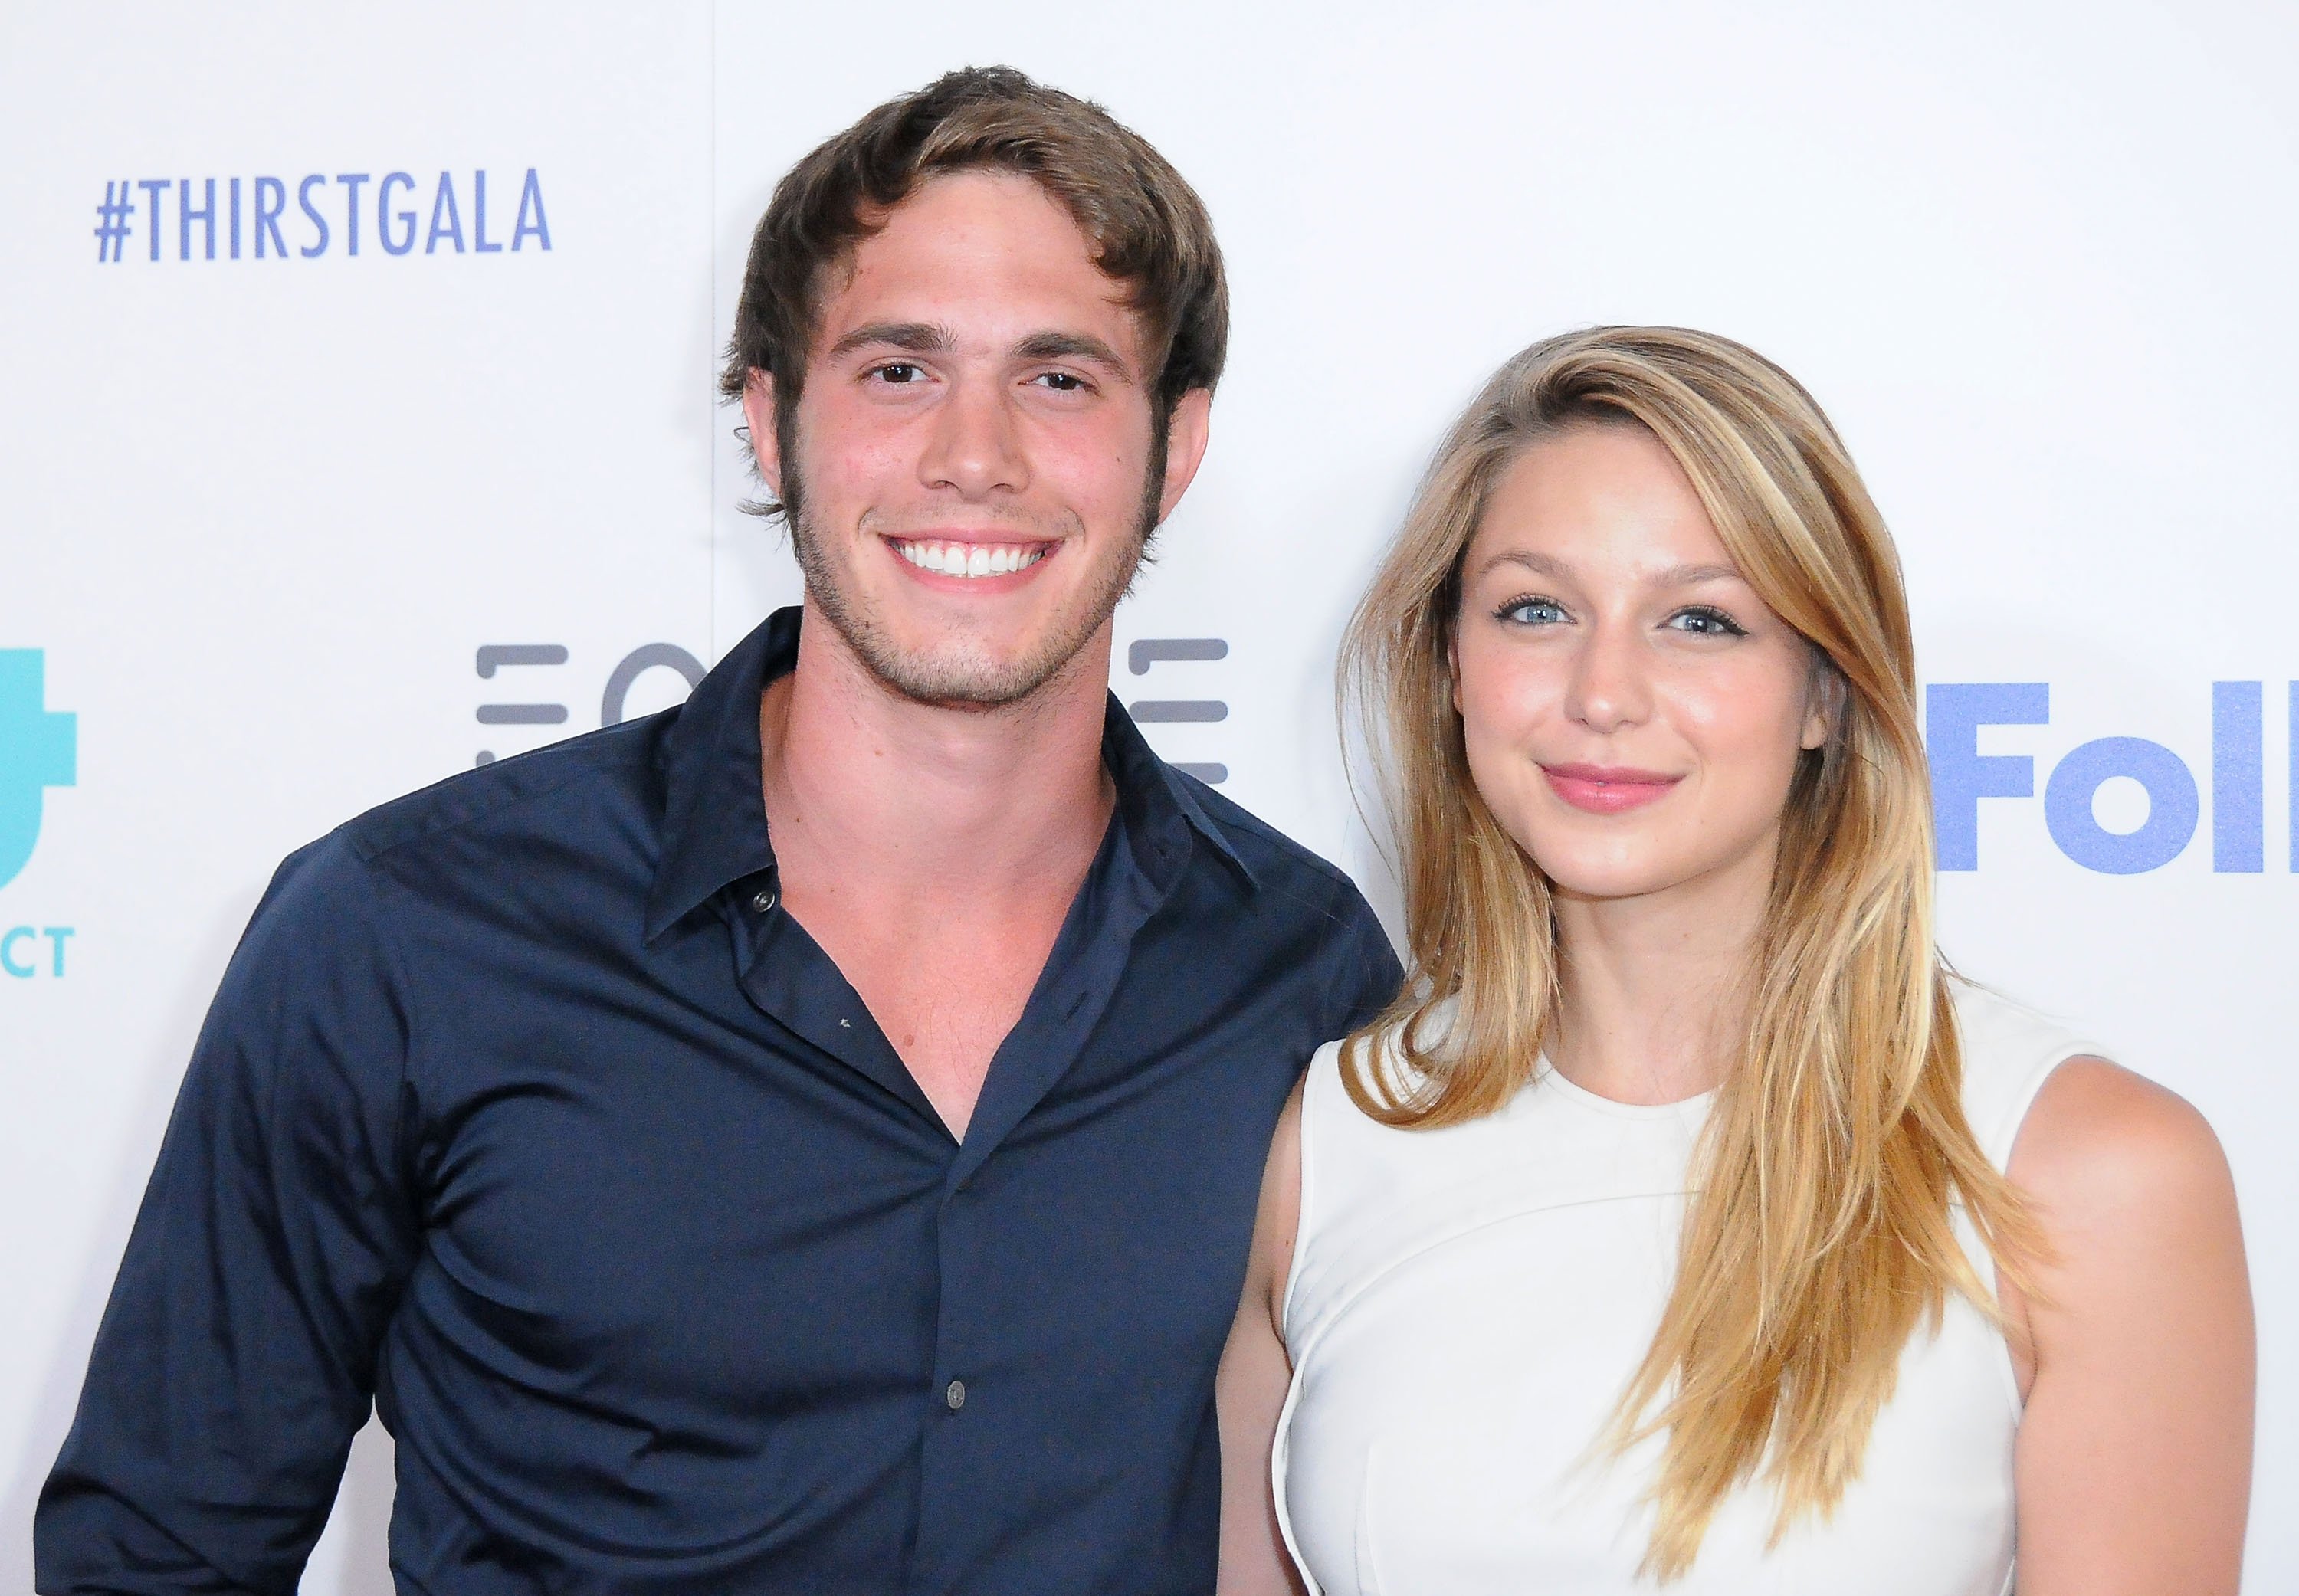 Blake Jenner and Melissa Benoist arrive at the 6th Annual Thirst Gala at the Beverly Hilton Hotel on June 30, 2015 in Beverly Hills, California. 